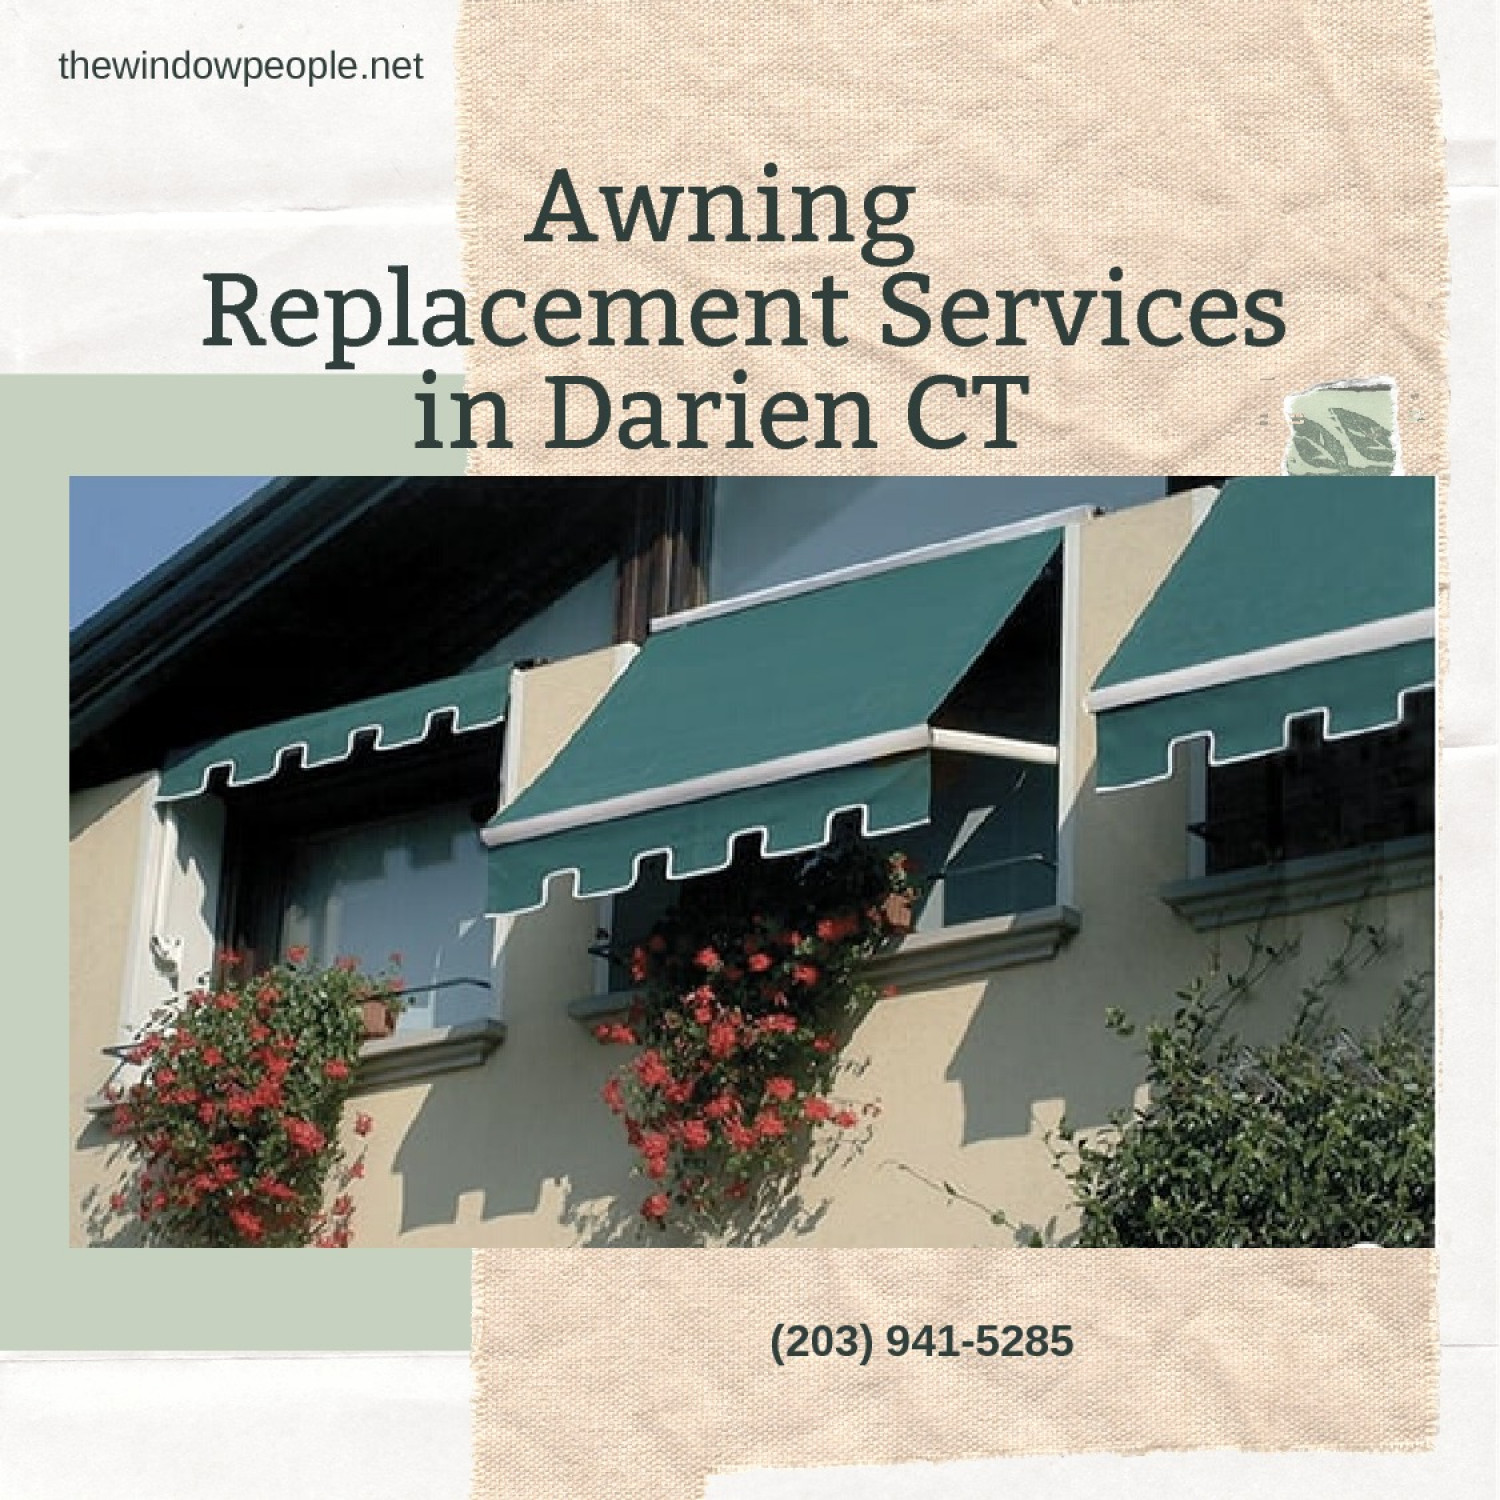 Awning Replacement Services in Darien CT Infographic